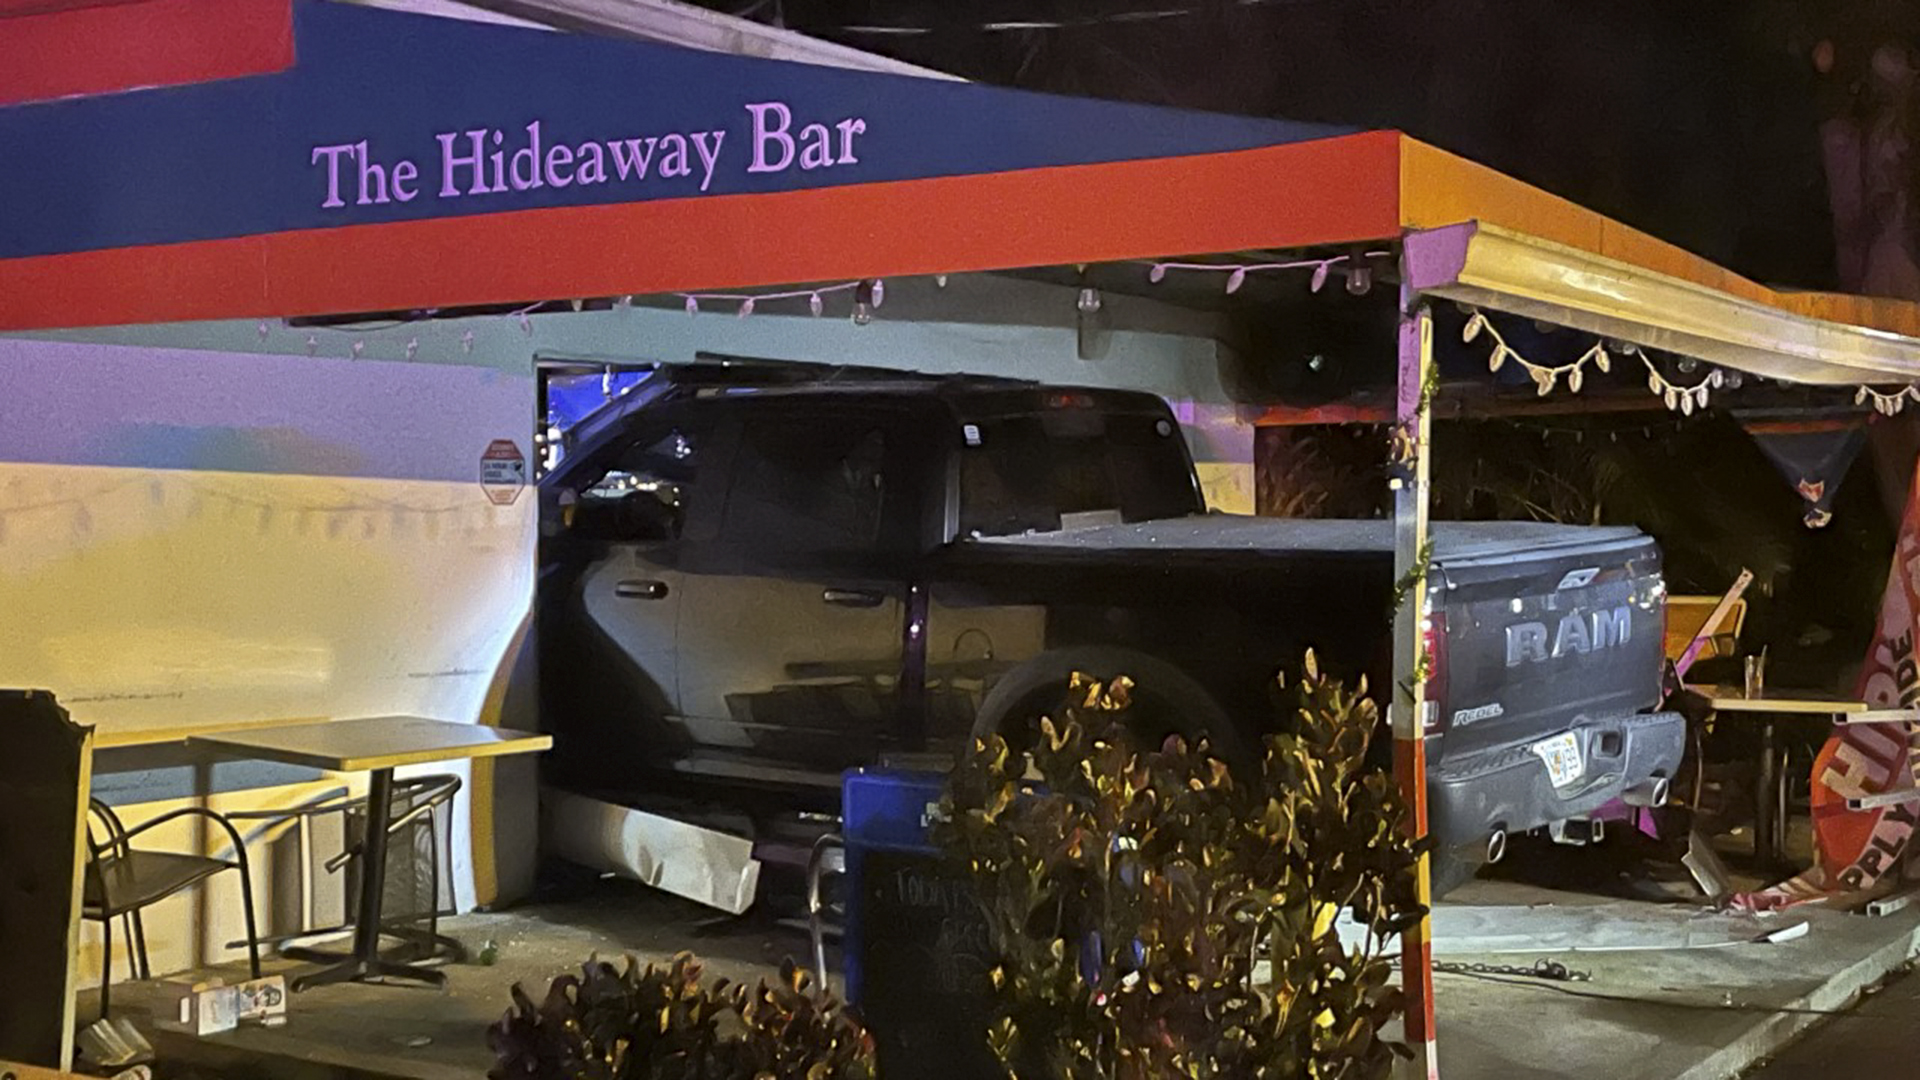 Orlando Hideaway Bar reopens after car crashes into it, raises